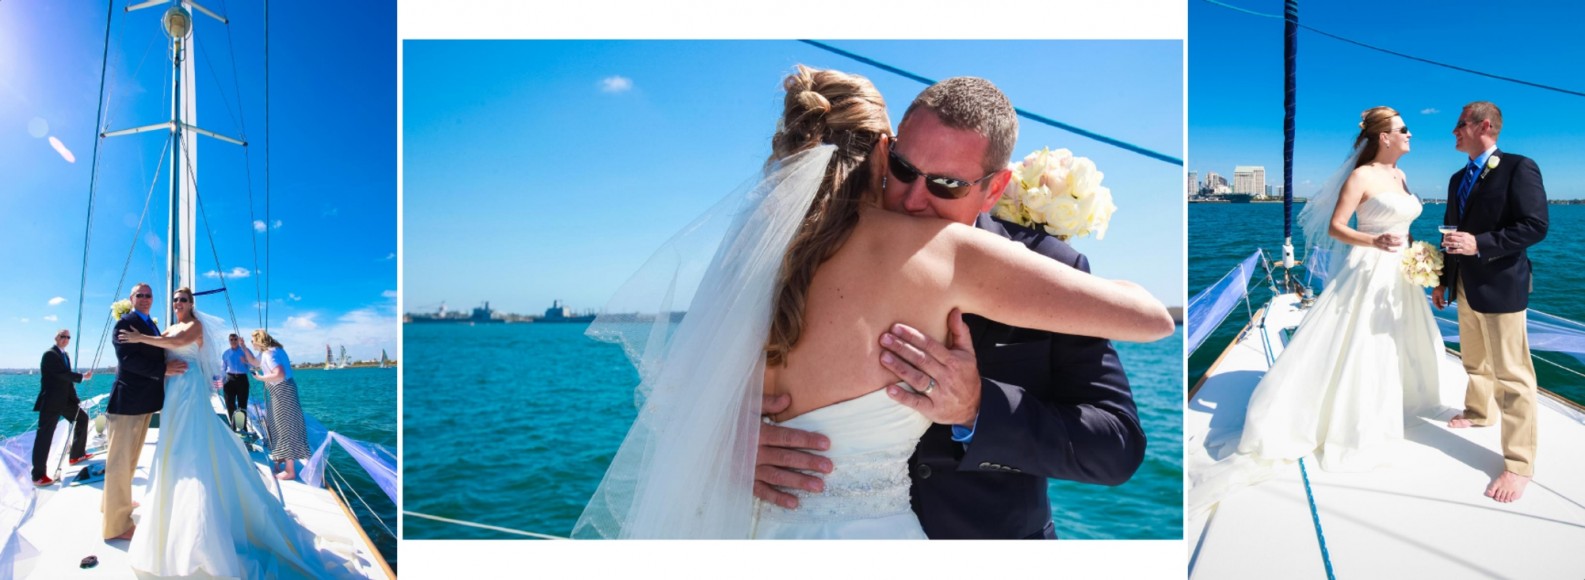 Laura and Davids Wedding Book - San Diego Yacht Wedding by Wedding Photographers Andrew Abouna - Pages 20-21